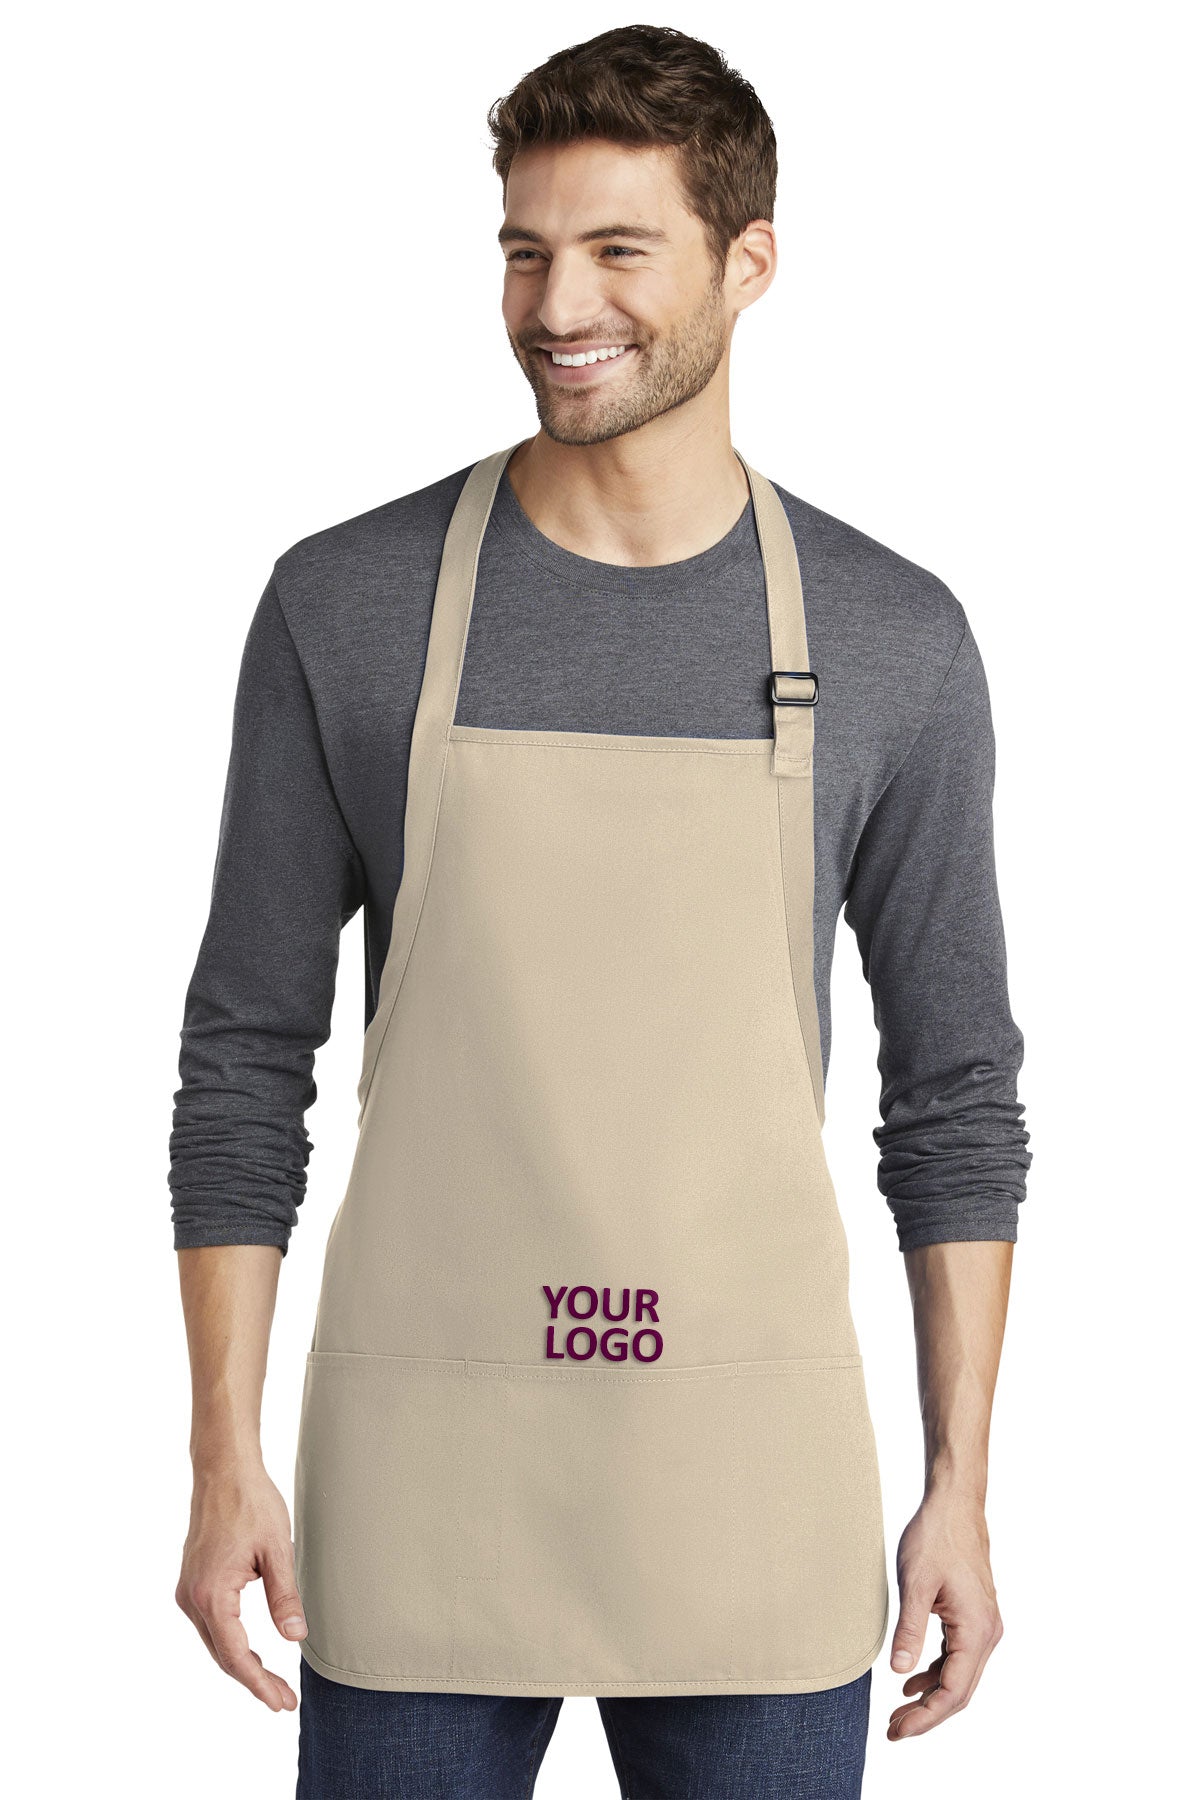 Port Authority Medium-Length Apron with Pouch Pockets A510 Stone